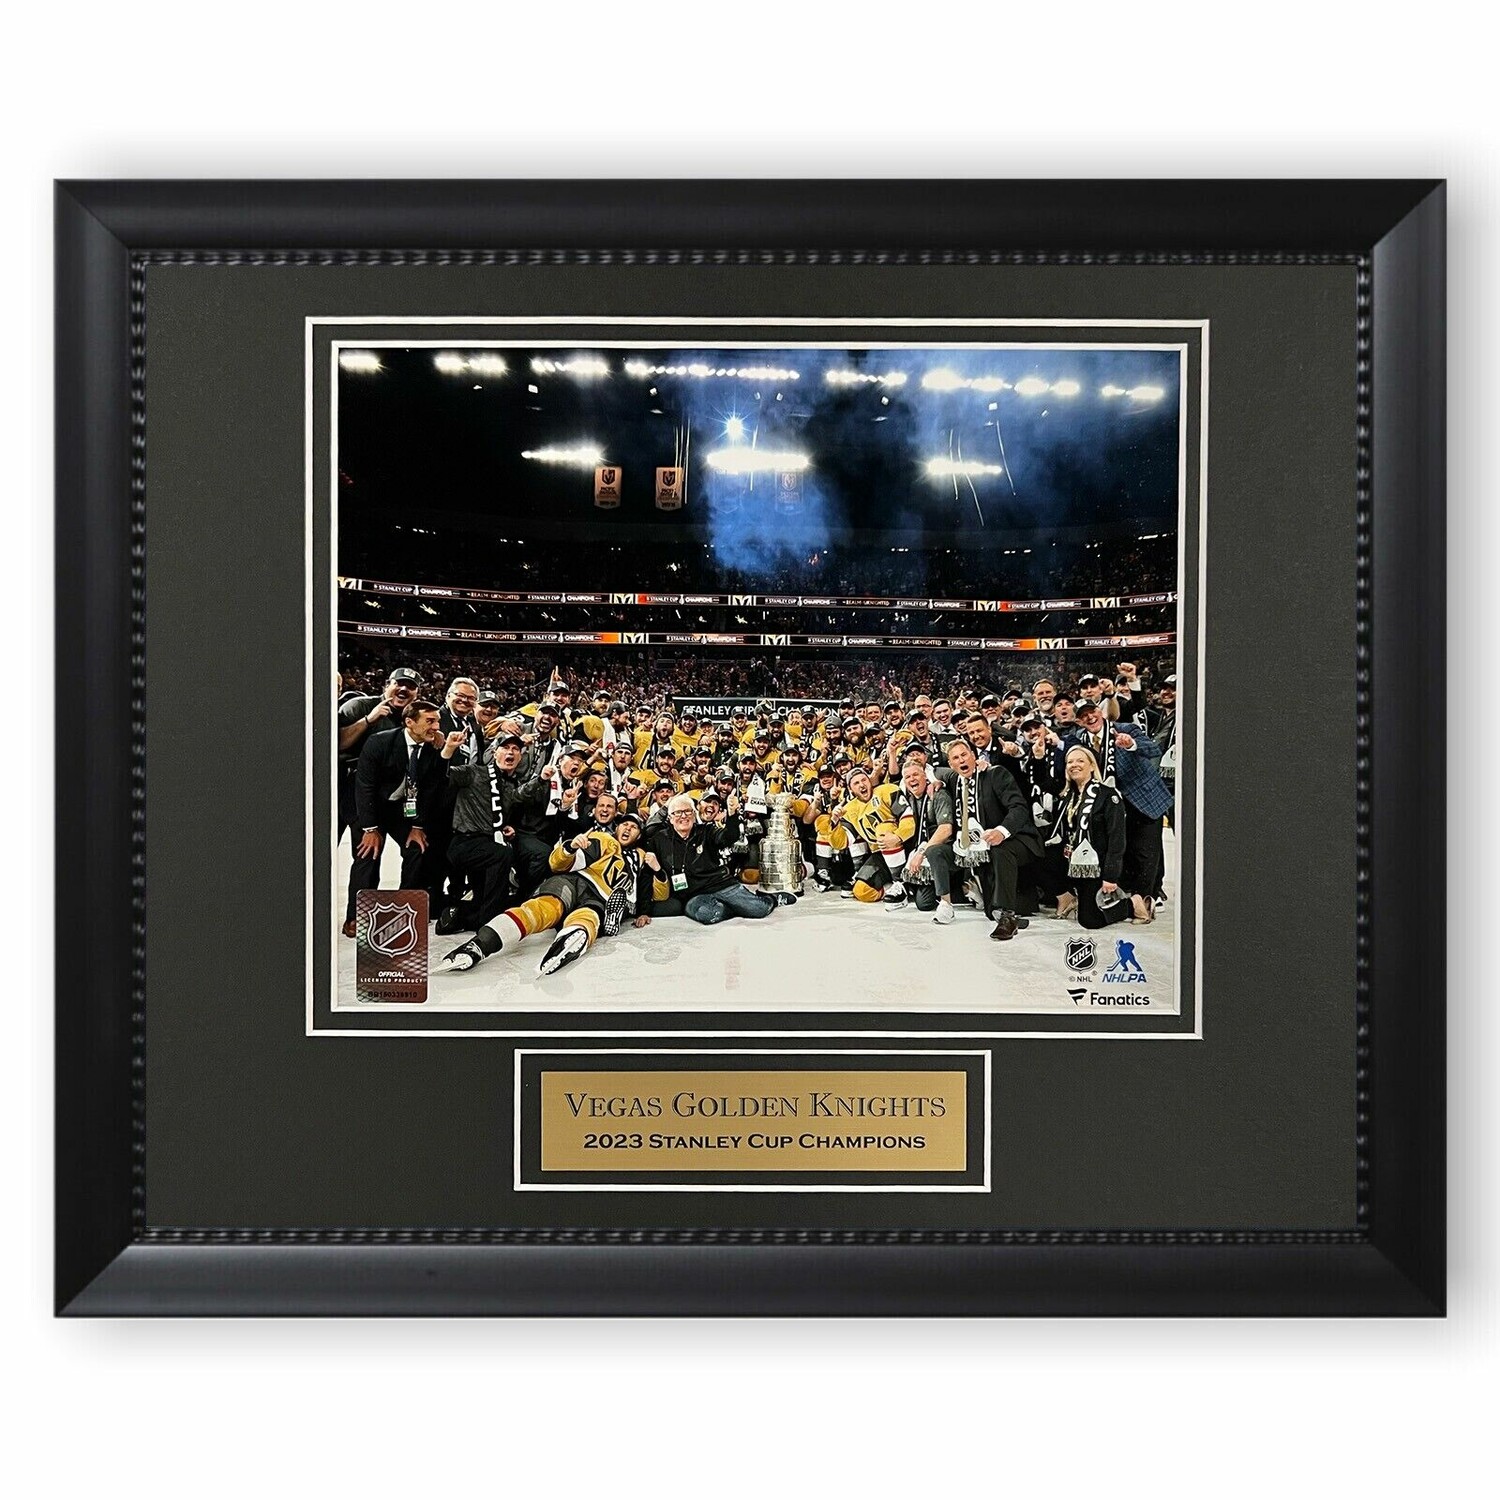 Vegas Golden Knights Collectibles, Knights Memorabilia, Vegas Golden Knights  Autographed Memorabilia